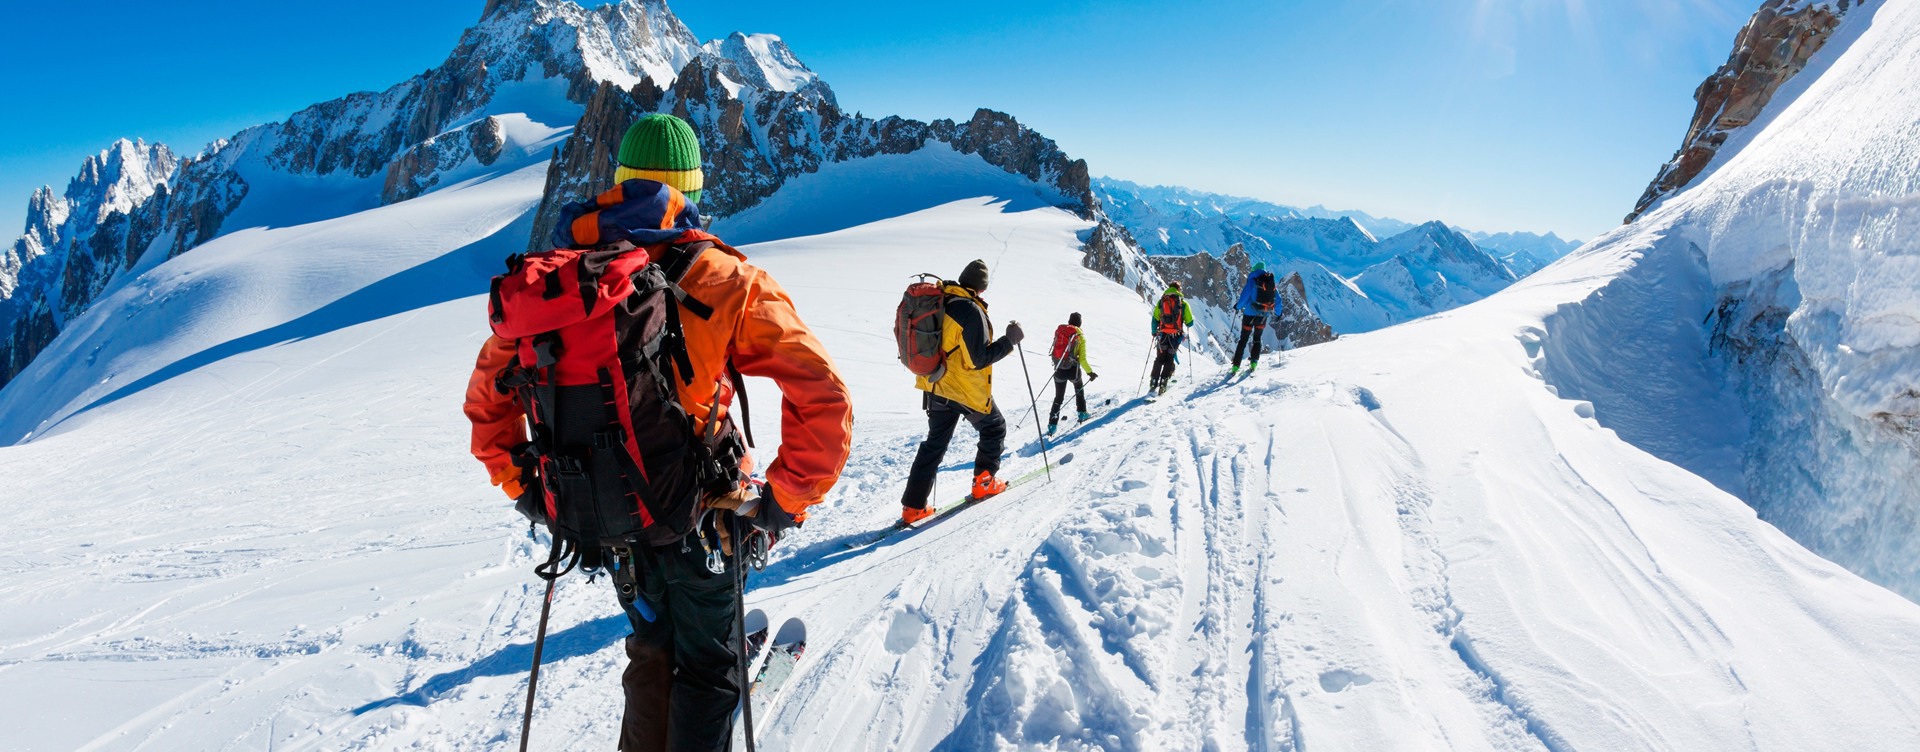 Have a great winter sports holiday in Vallorcine
with high-quality winter sports gear